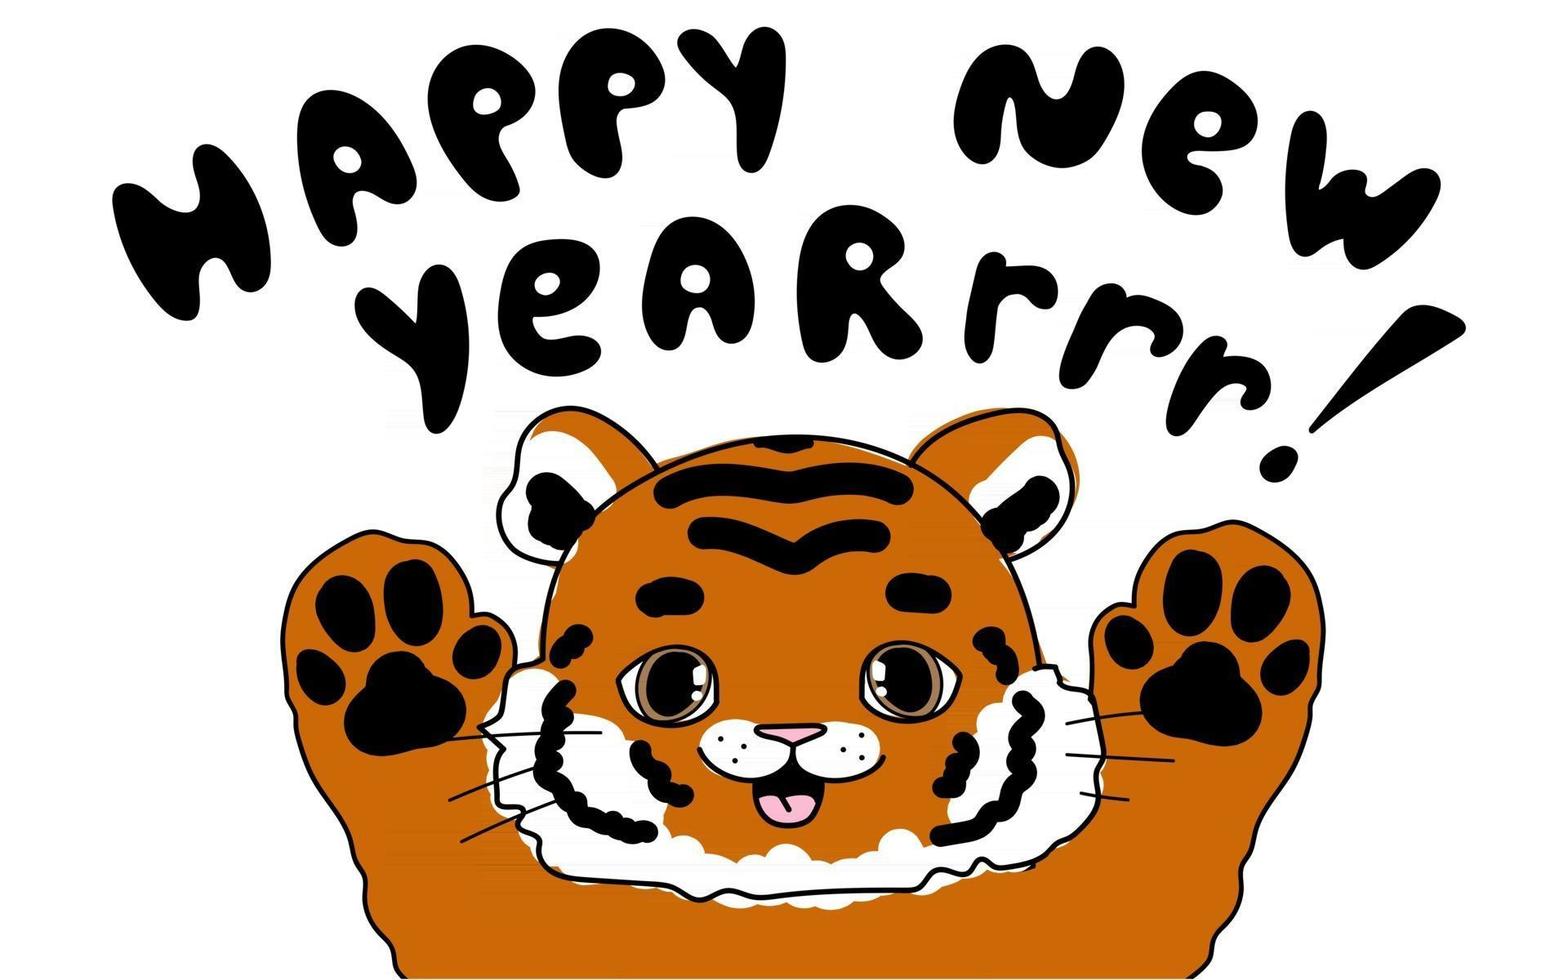 Cute doodle little tiger Baby animals with kid illustration happy new year roar text for card poster calendar vector